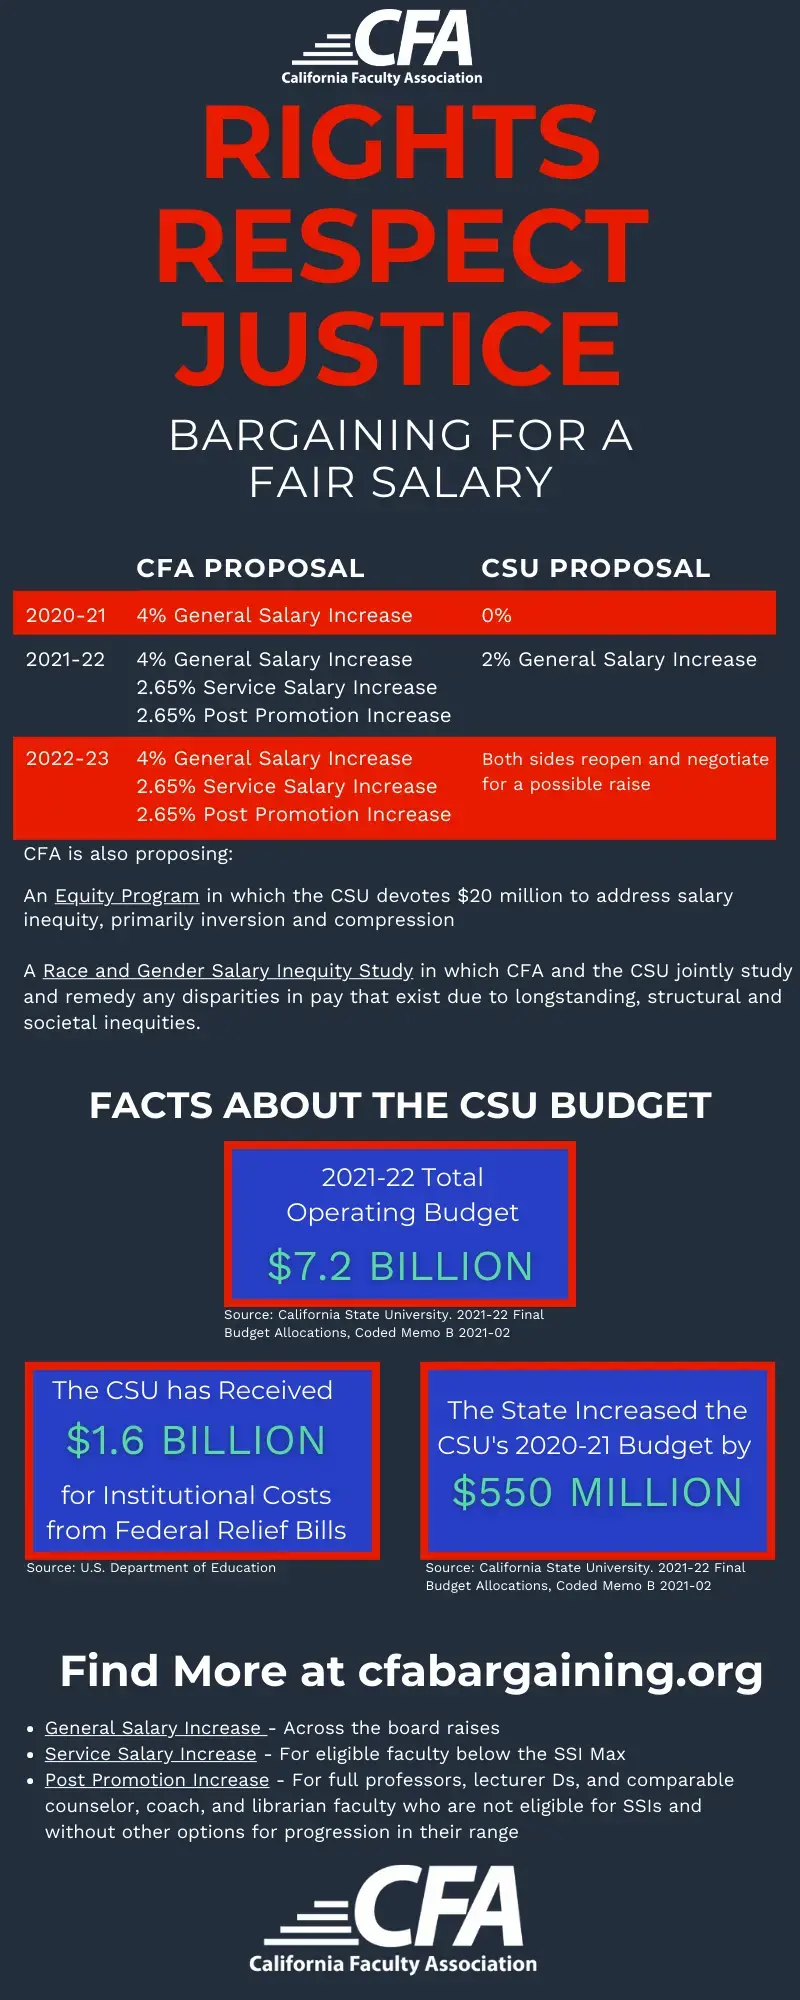 Infographic comparing the CFA and CSU bargaining proposals on salary.